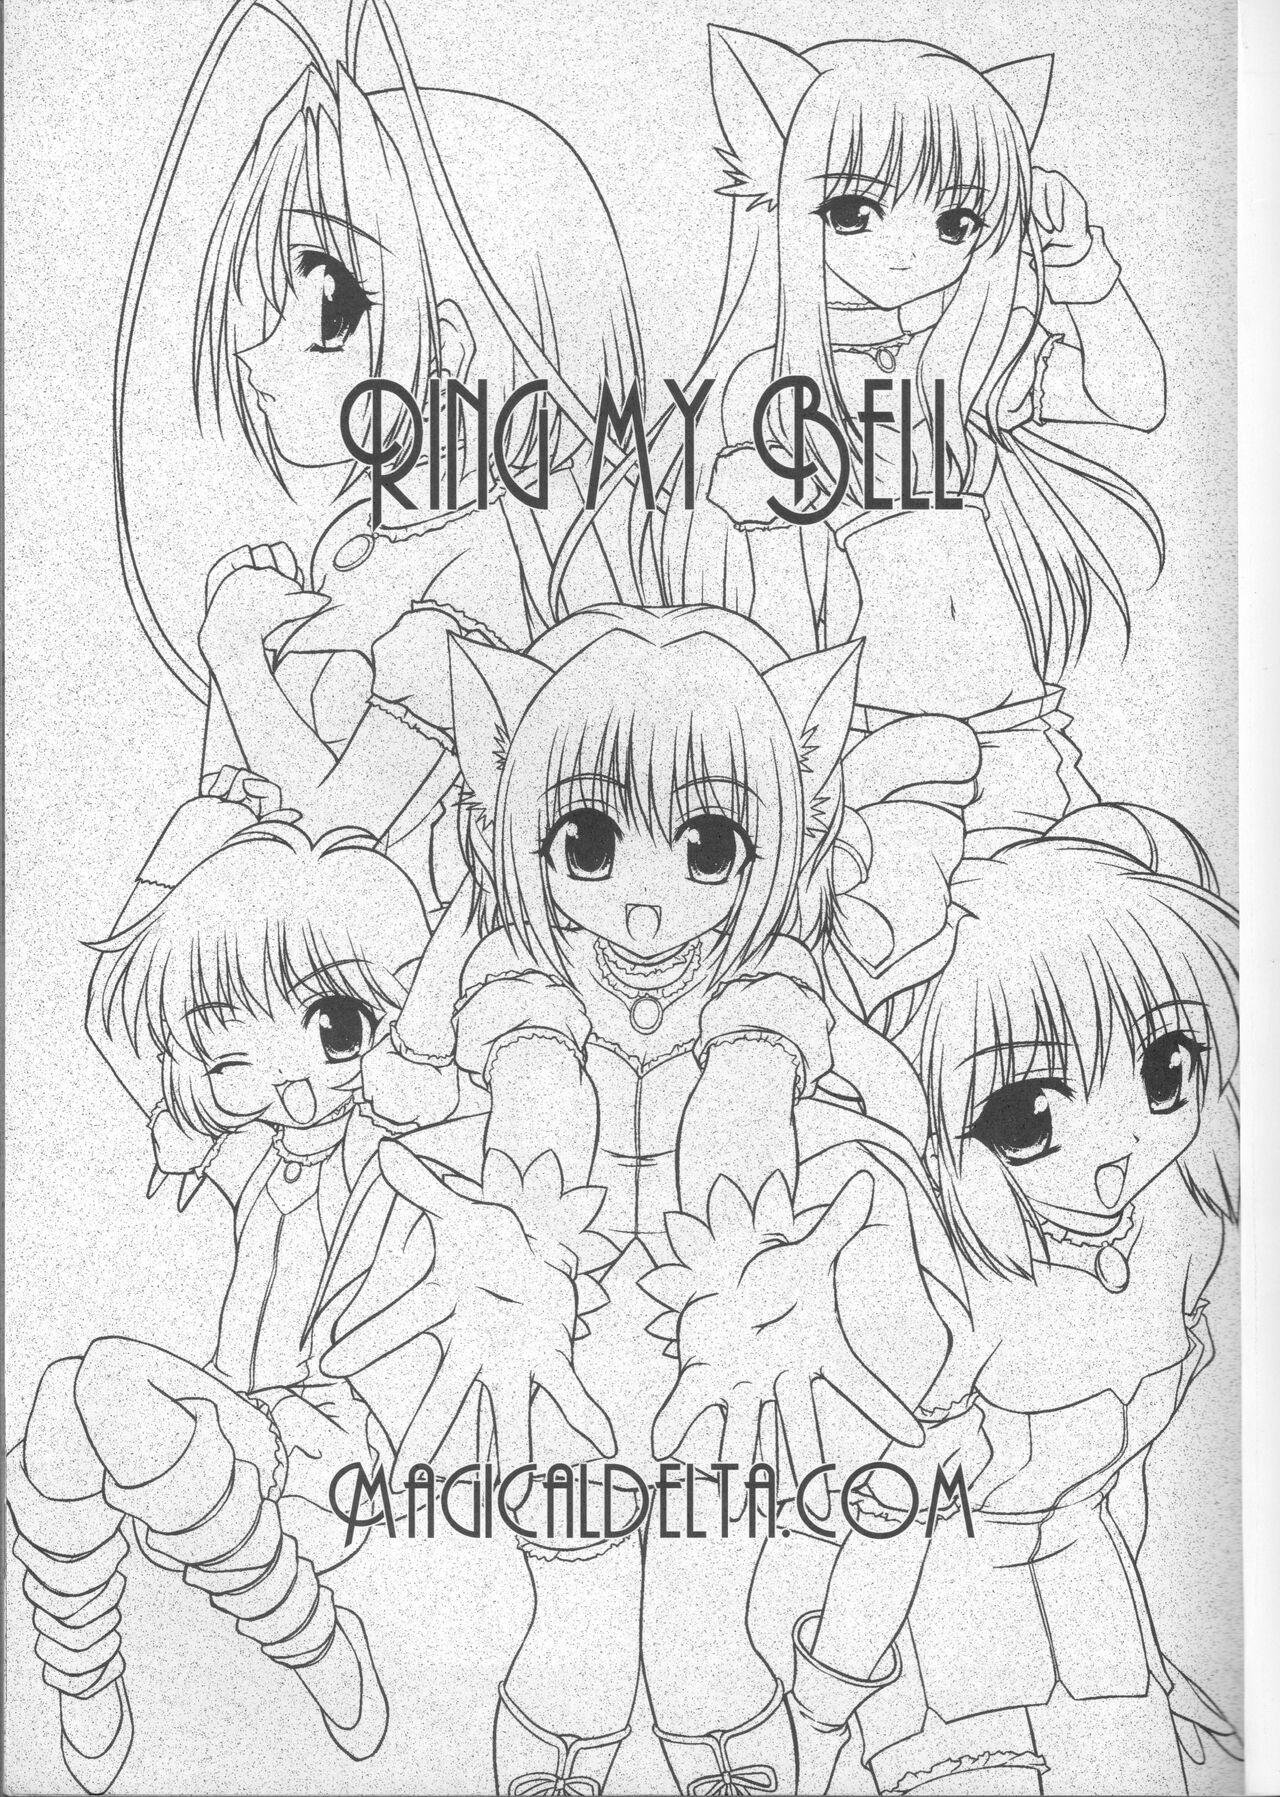 Neighbor Ring My Bell - MAGICALDELTA.COM - Tokyo mew mew | mew mew power Secret - Picture 2